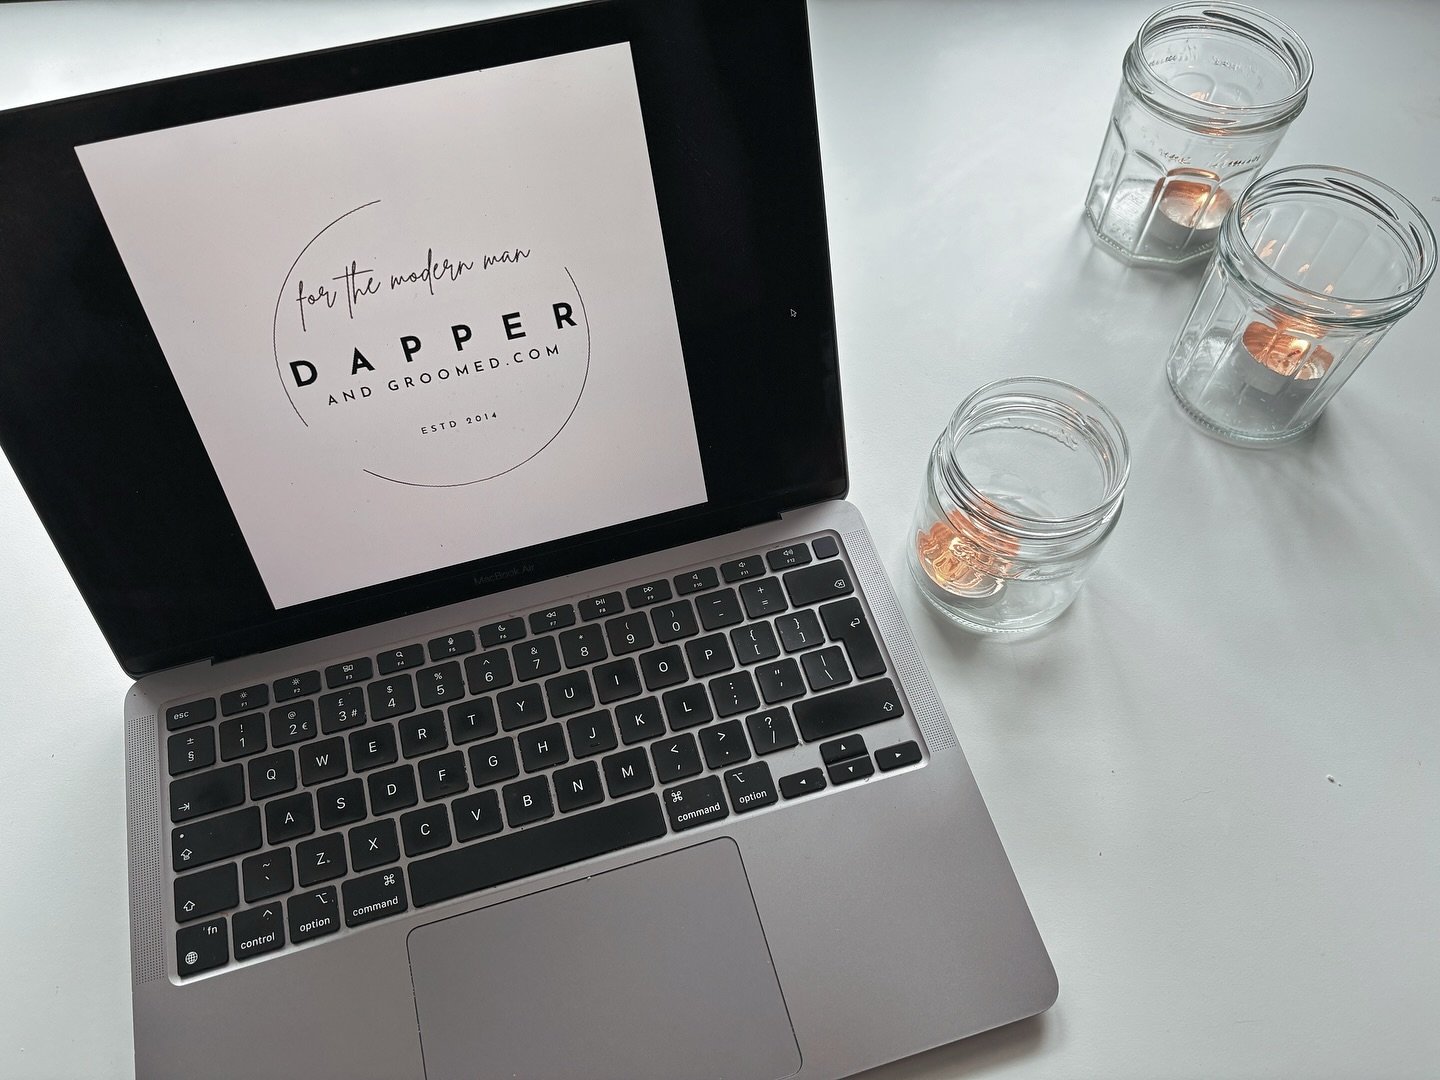 🎉 Today marks a remarkable milestone&mdash;10 years of blogging at DapperandGroomed.com! 🌟 From the humble beginnings as a daddy blogger, sharing the ups and downs of fatherhood, to now leading discussions on men&rsquo;s fashion, skincare, and tech